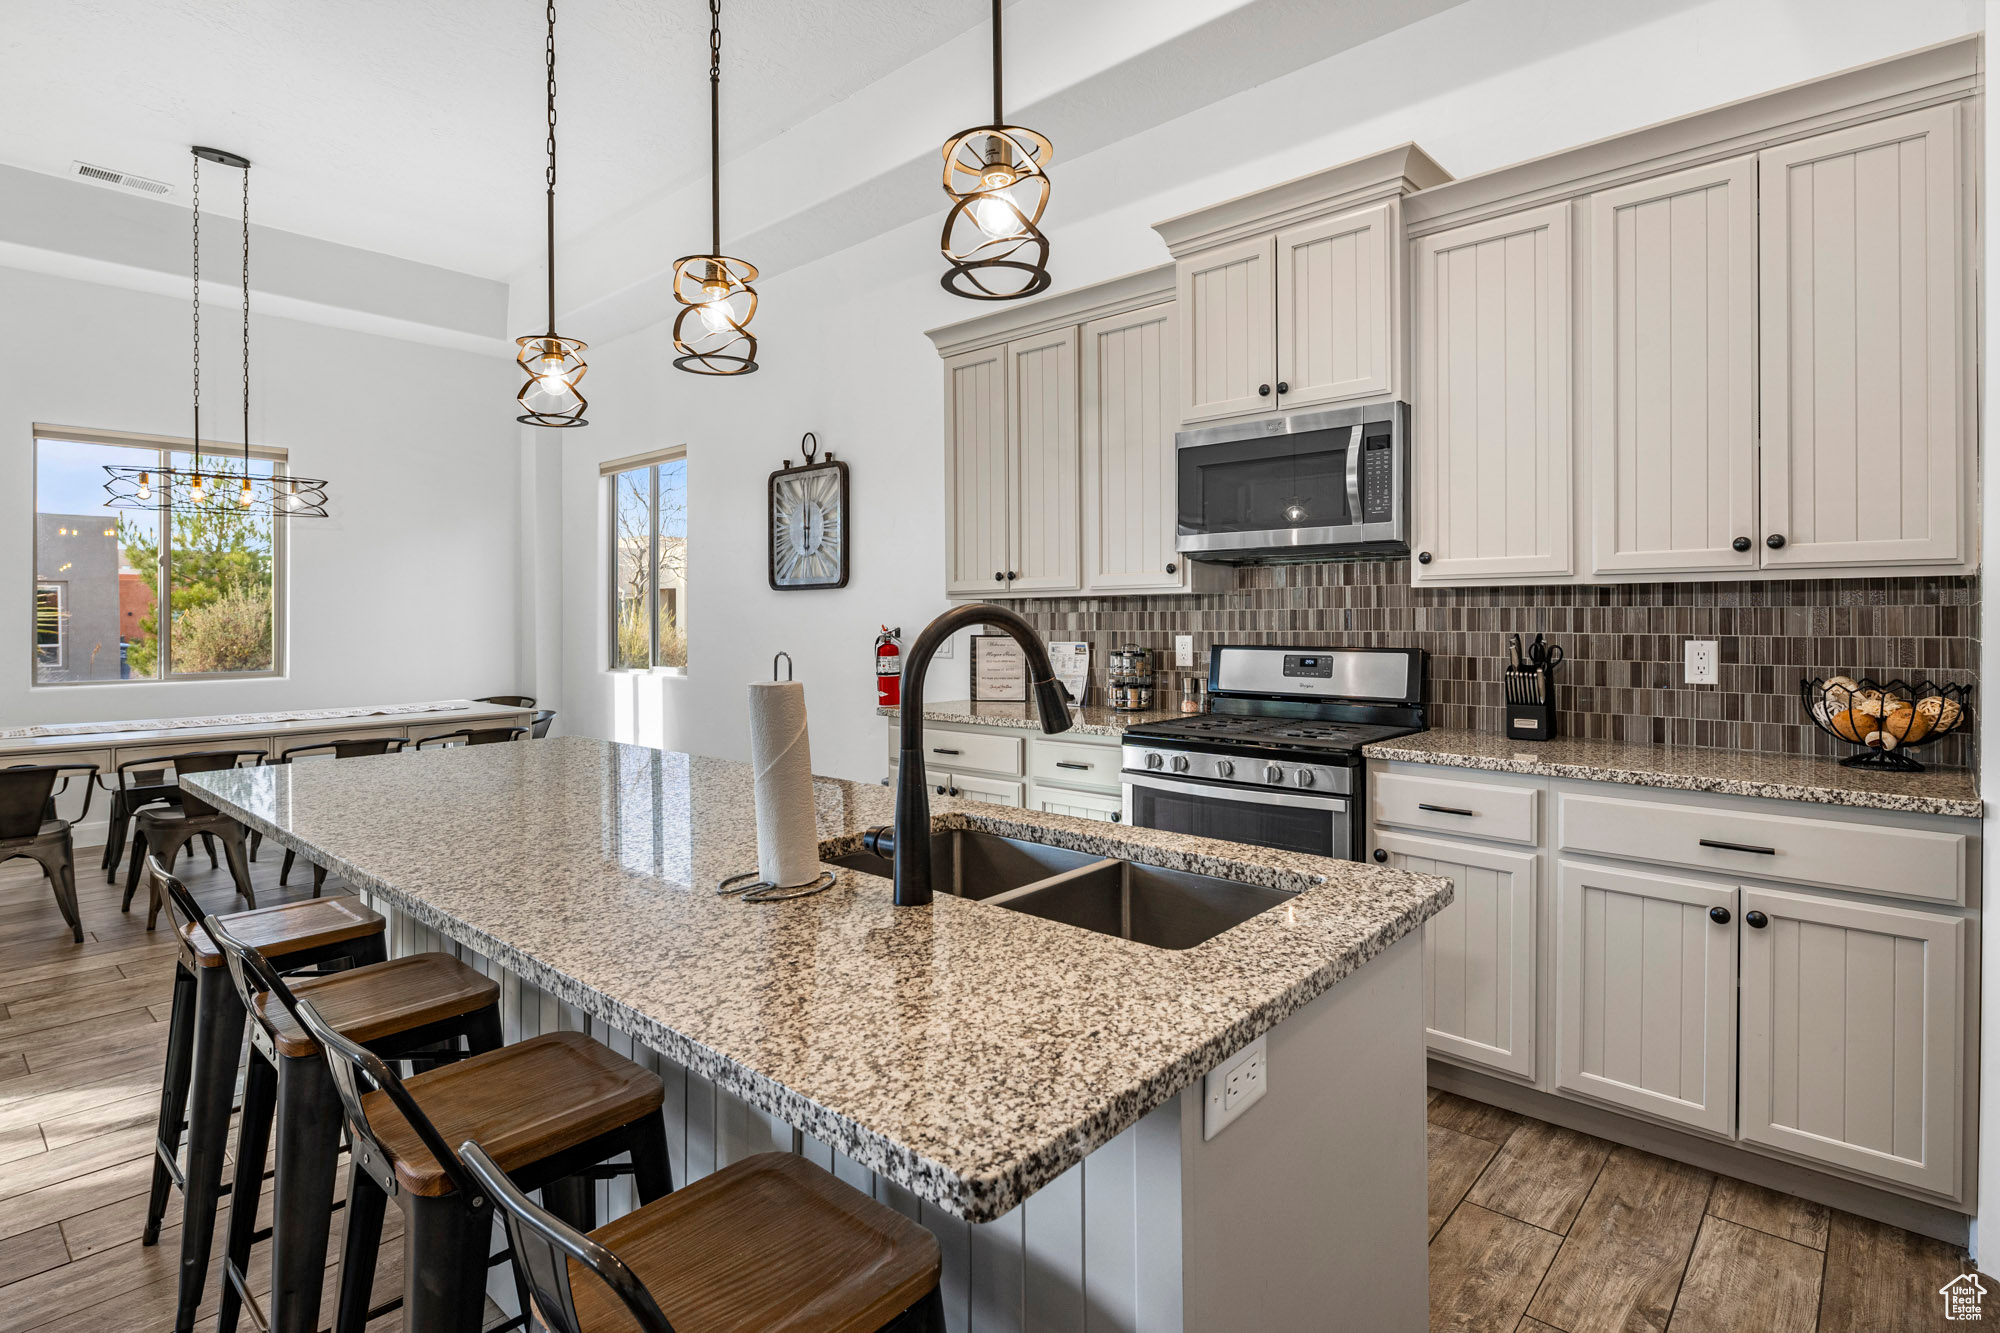 Kitchen featuring light hardwood / wood-style floors, tasteful backsplash, a notable chandelier, hanging light fixtures, and appliances with stainless steel finishes